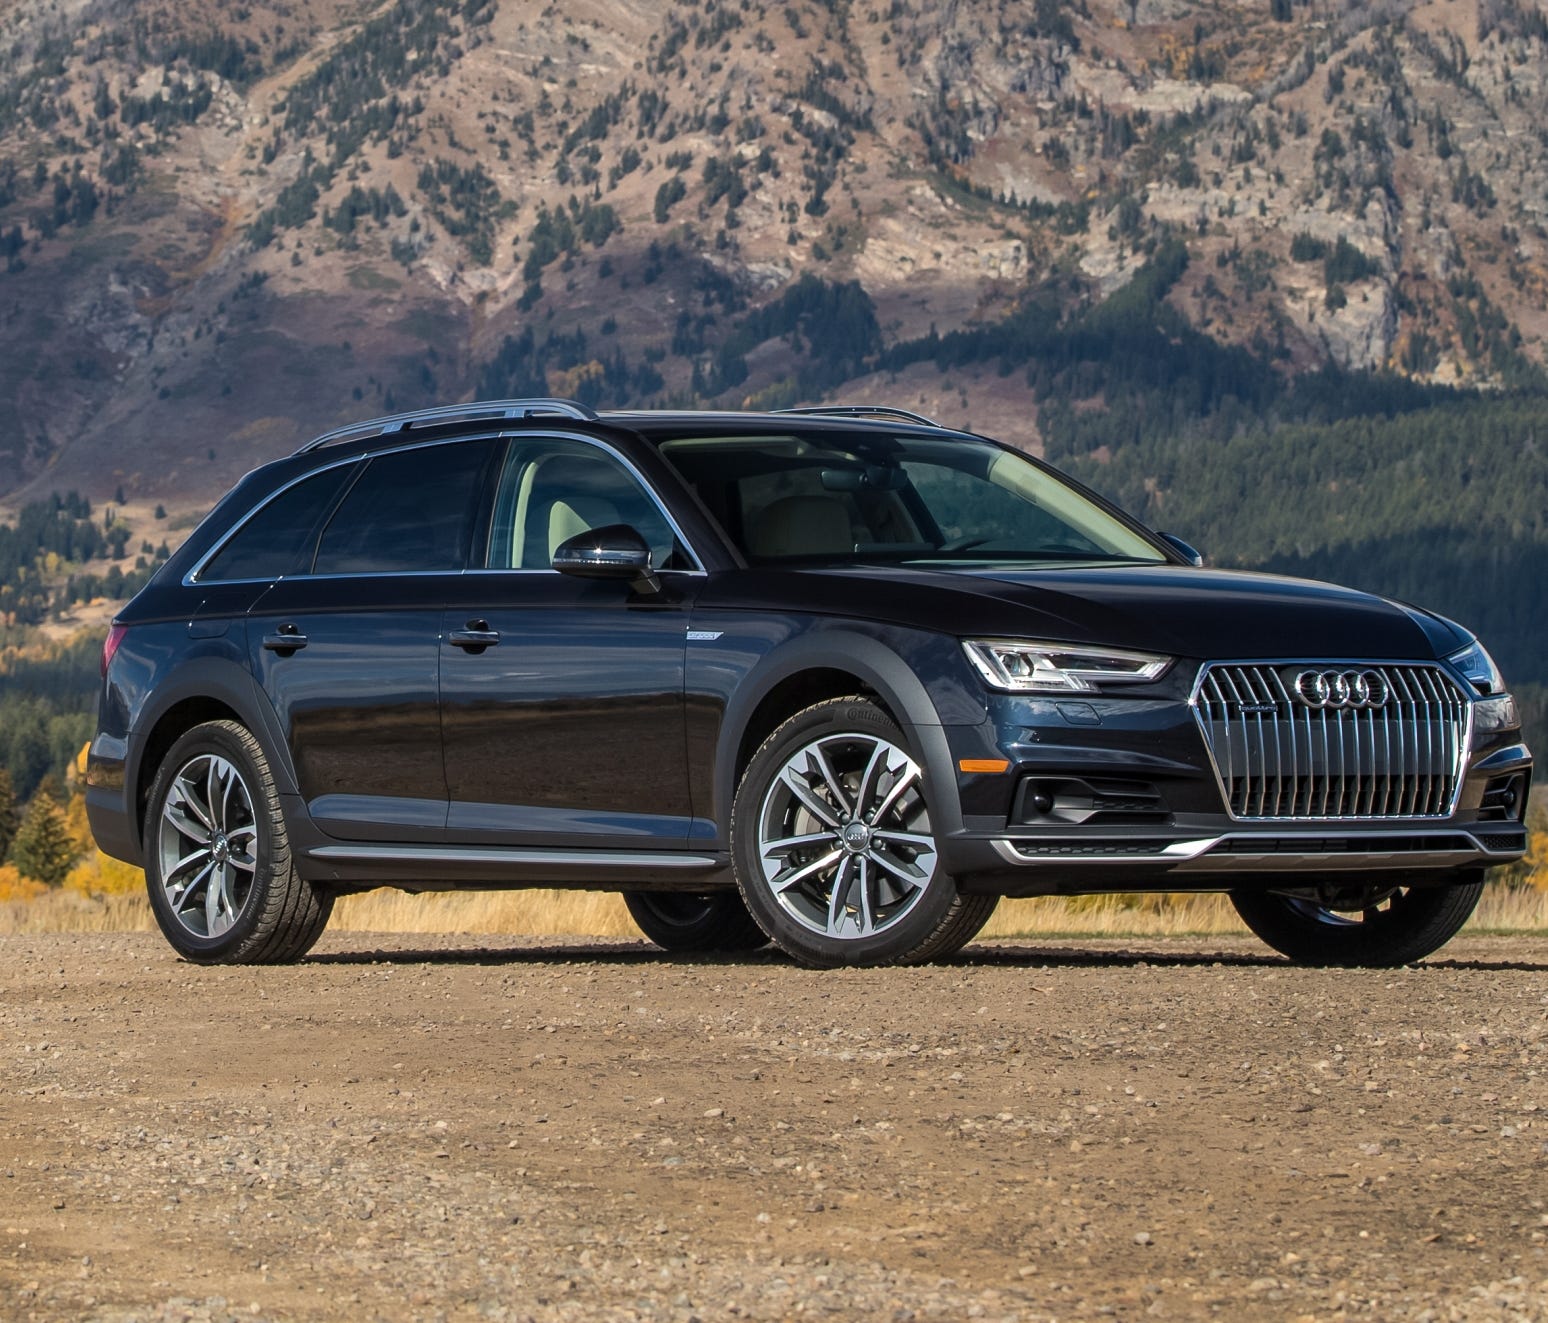 Audi's A4 Allroad is meant for the outdoors